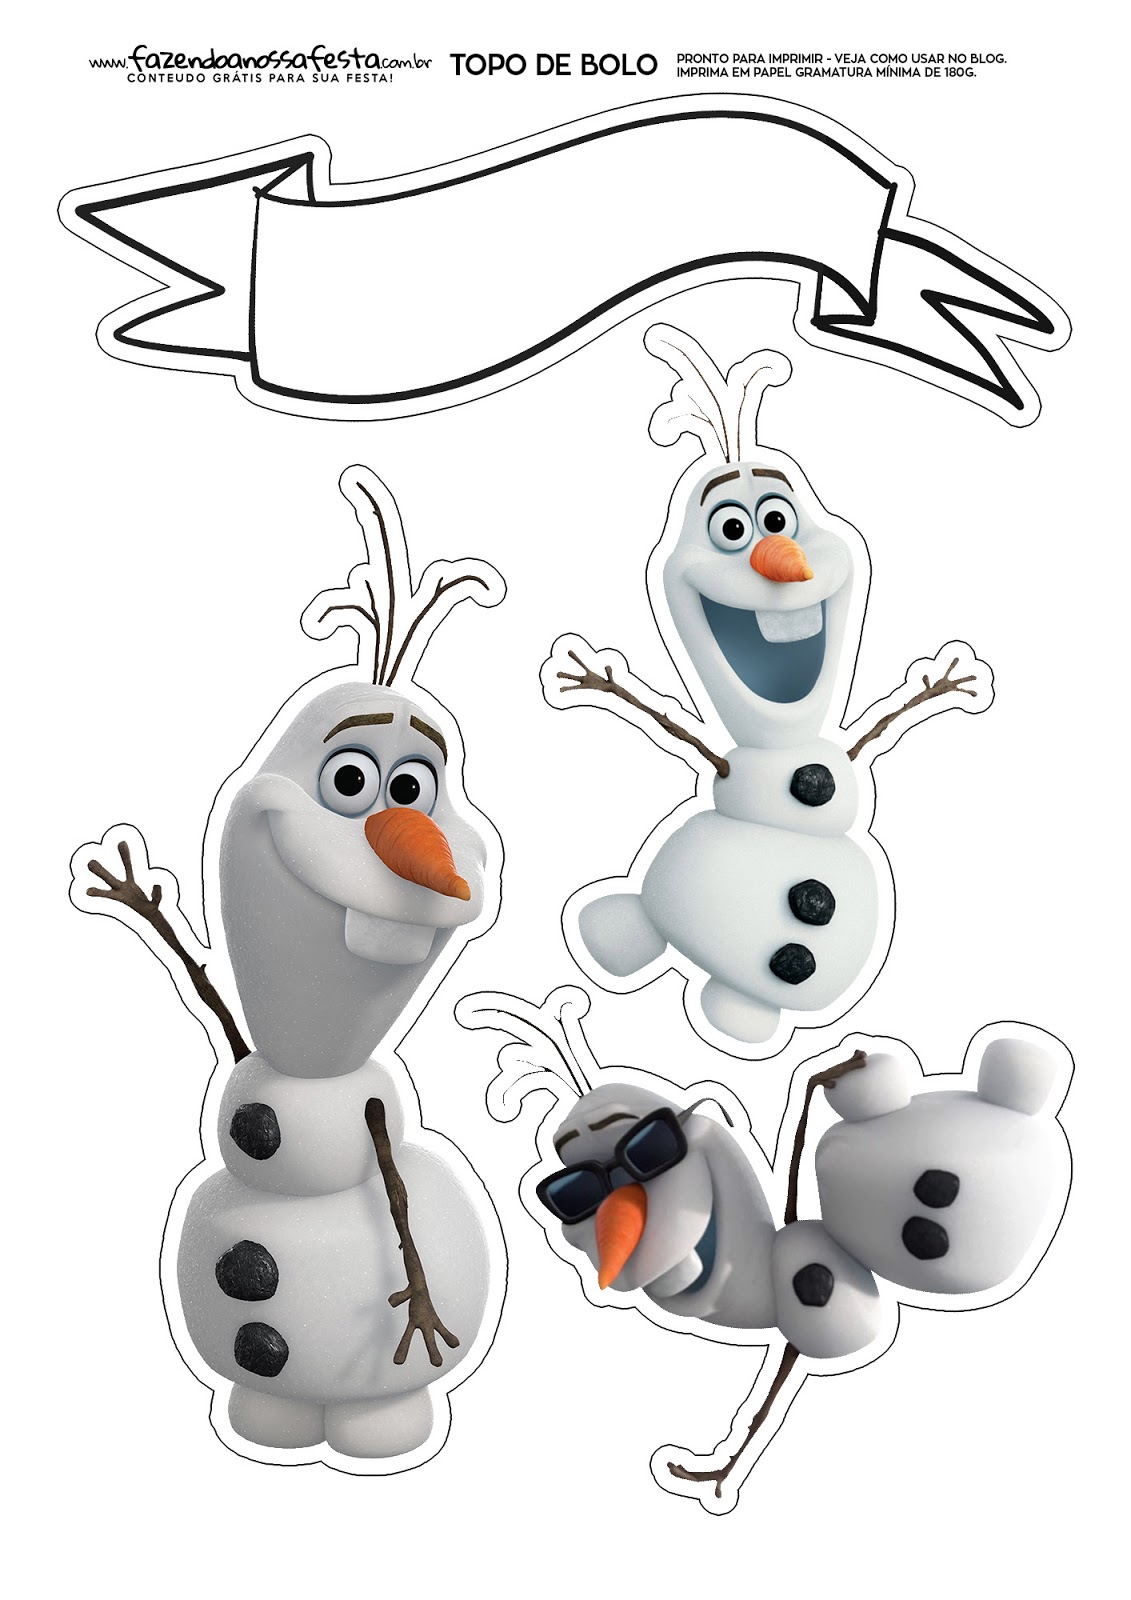 Olaf Free Printable Cake Toppers. Oh My Fiesta! in english